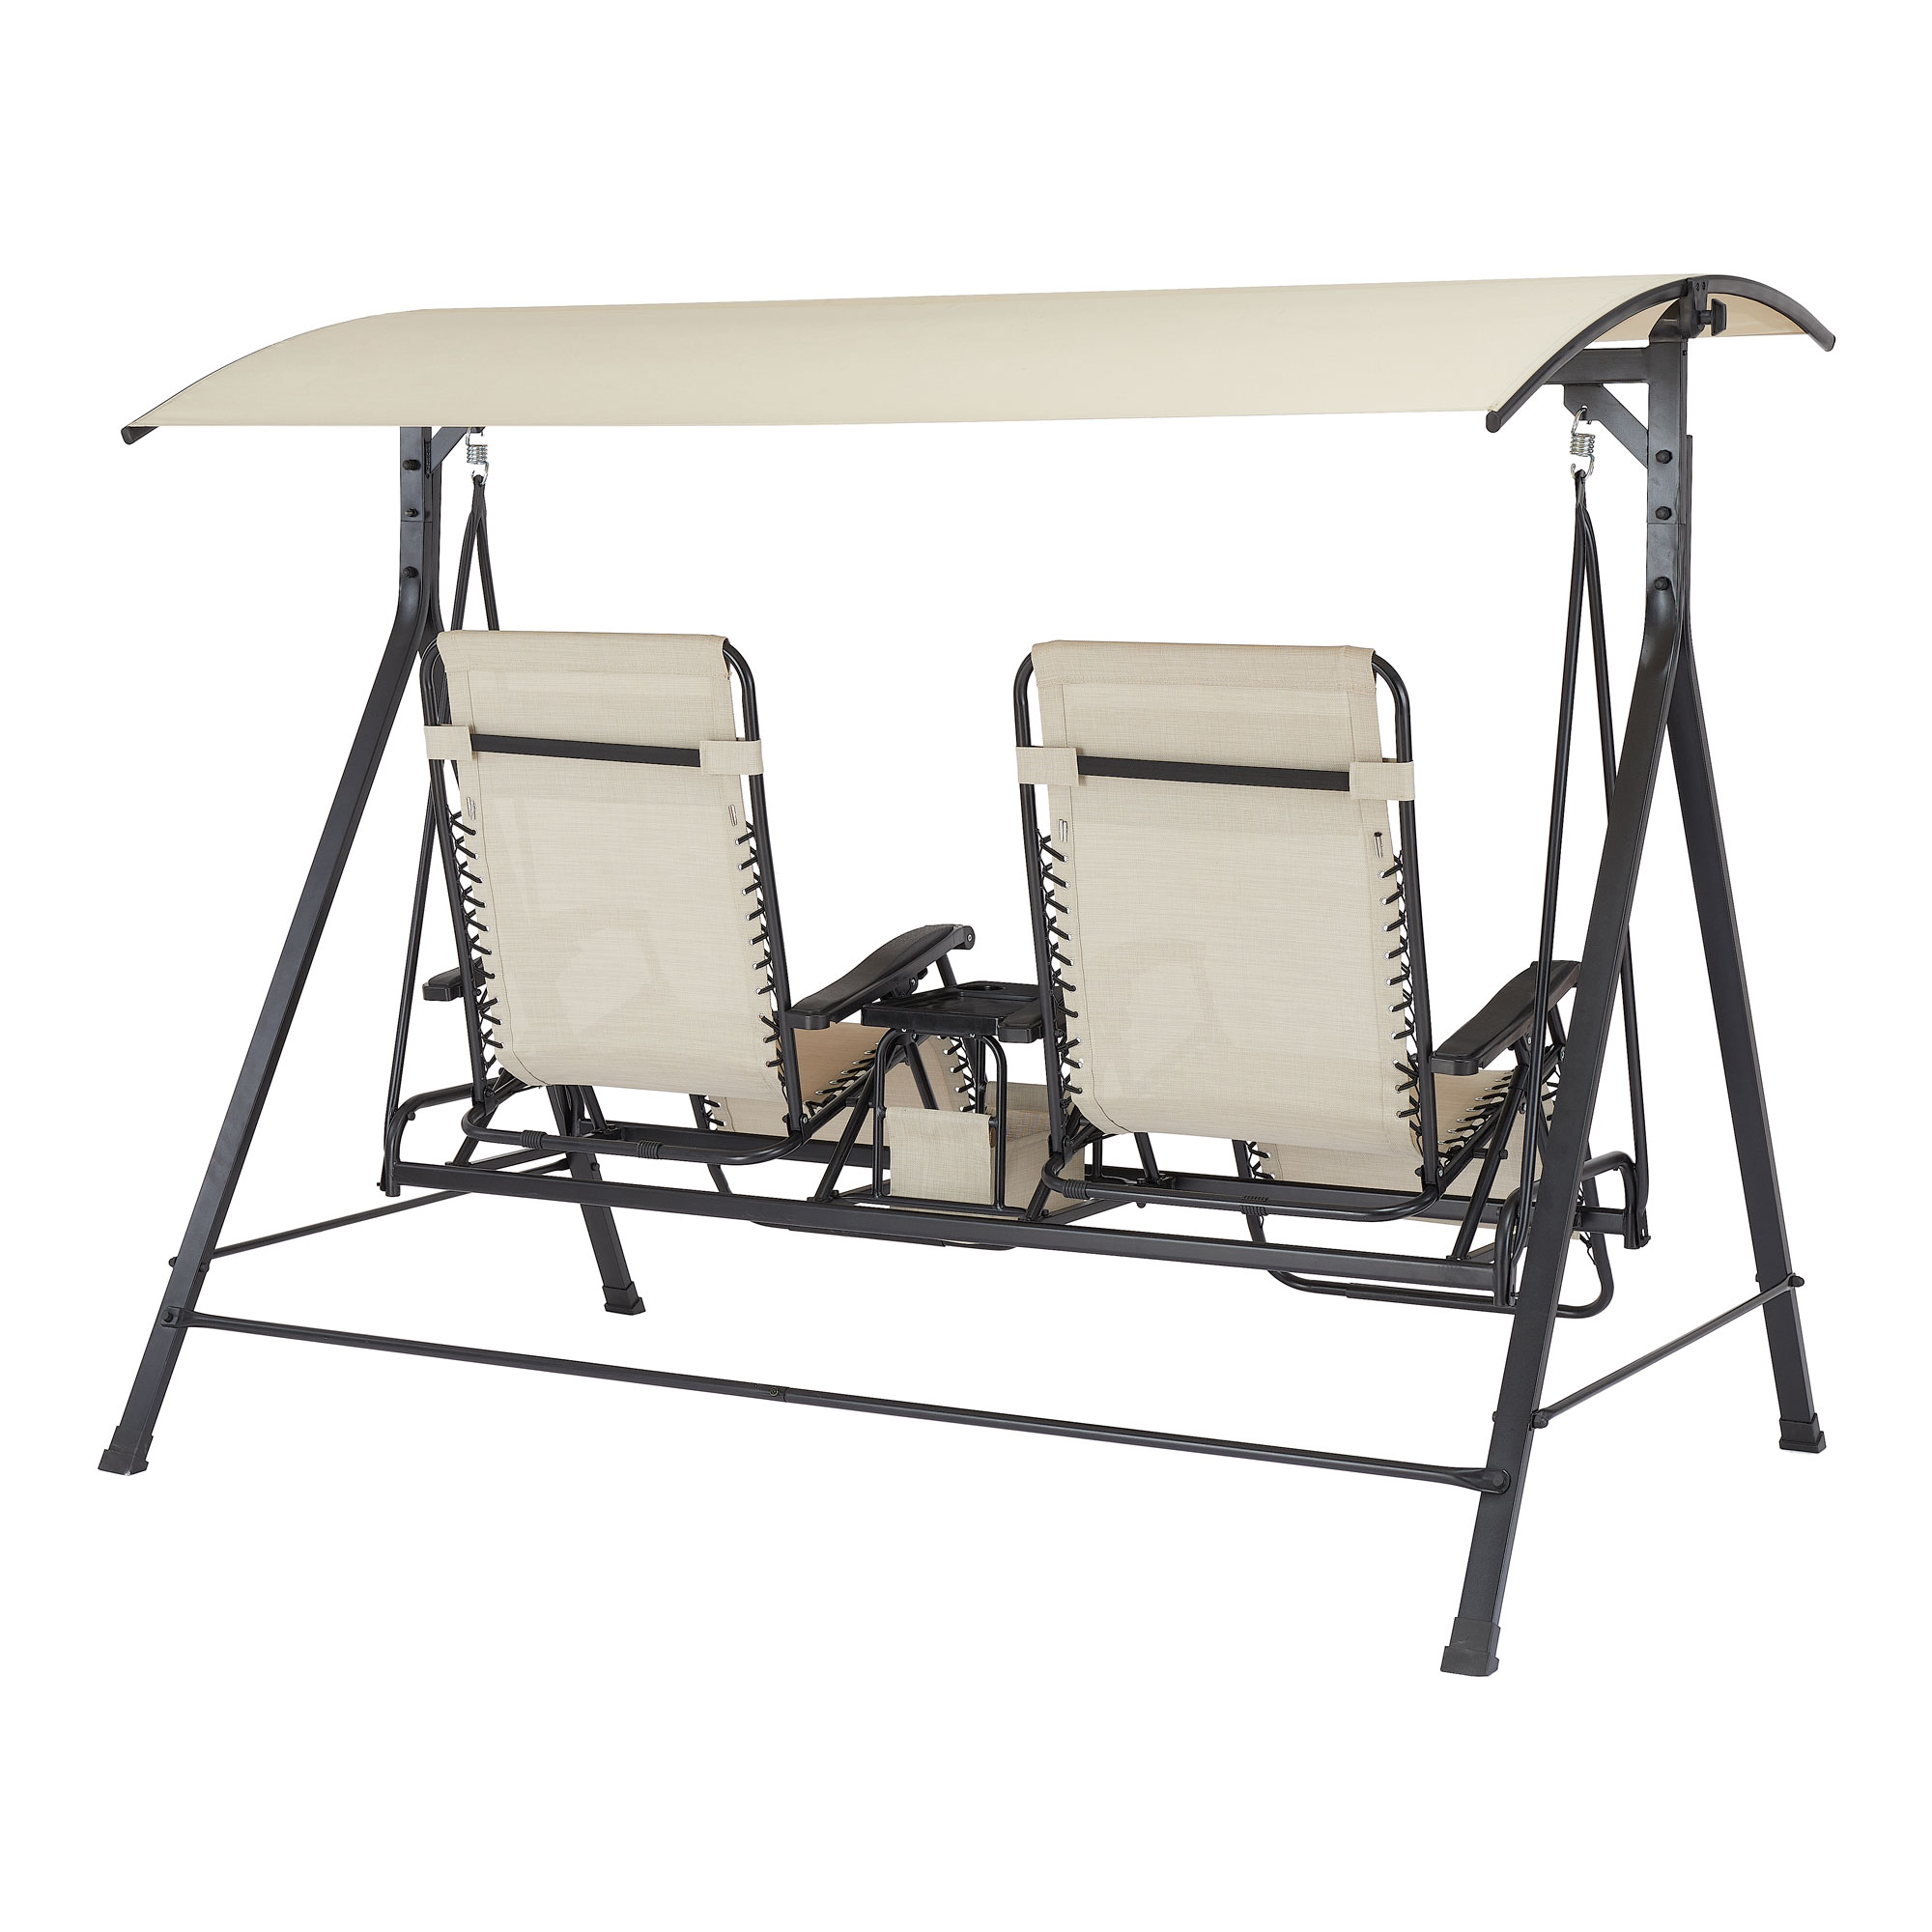 Mainstays 2-Seat Reclining Oversized Zero-Gravity Swing with Canopy and Center Storage Console, Beige/Black - image 4 of 9